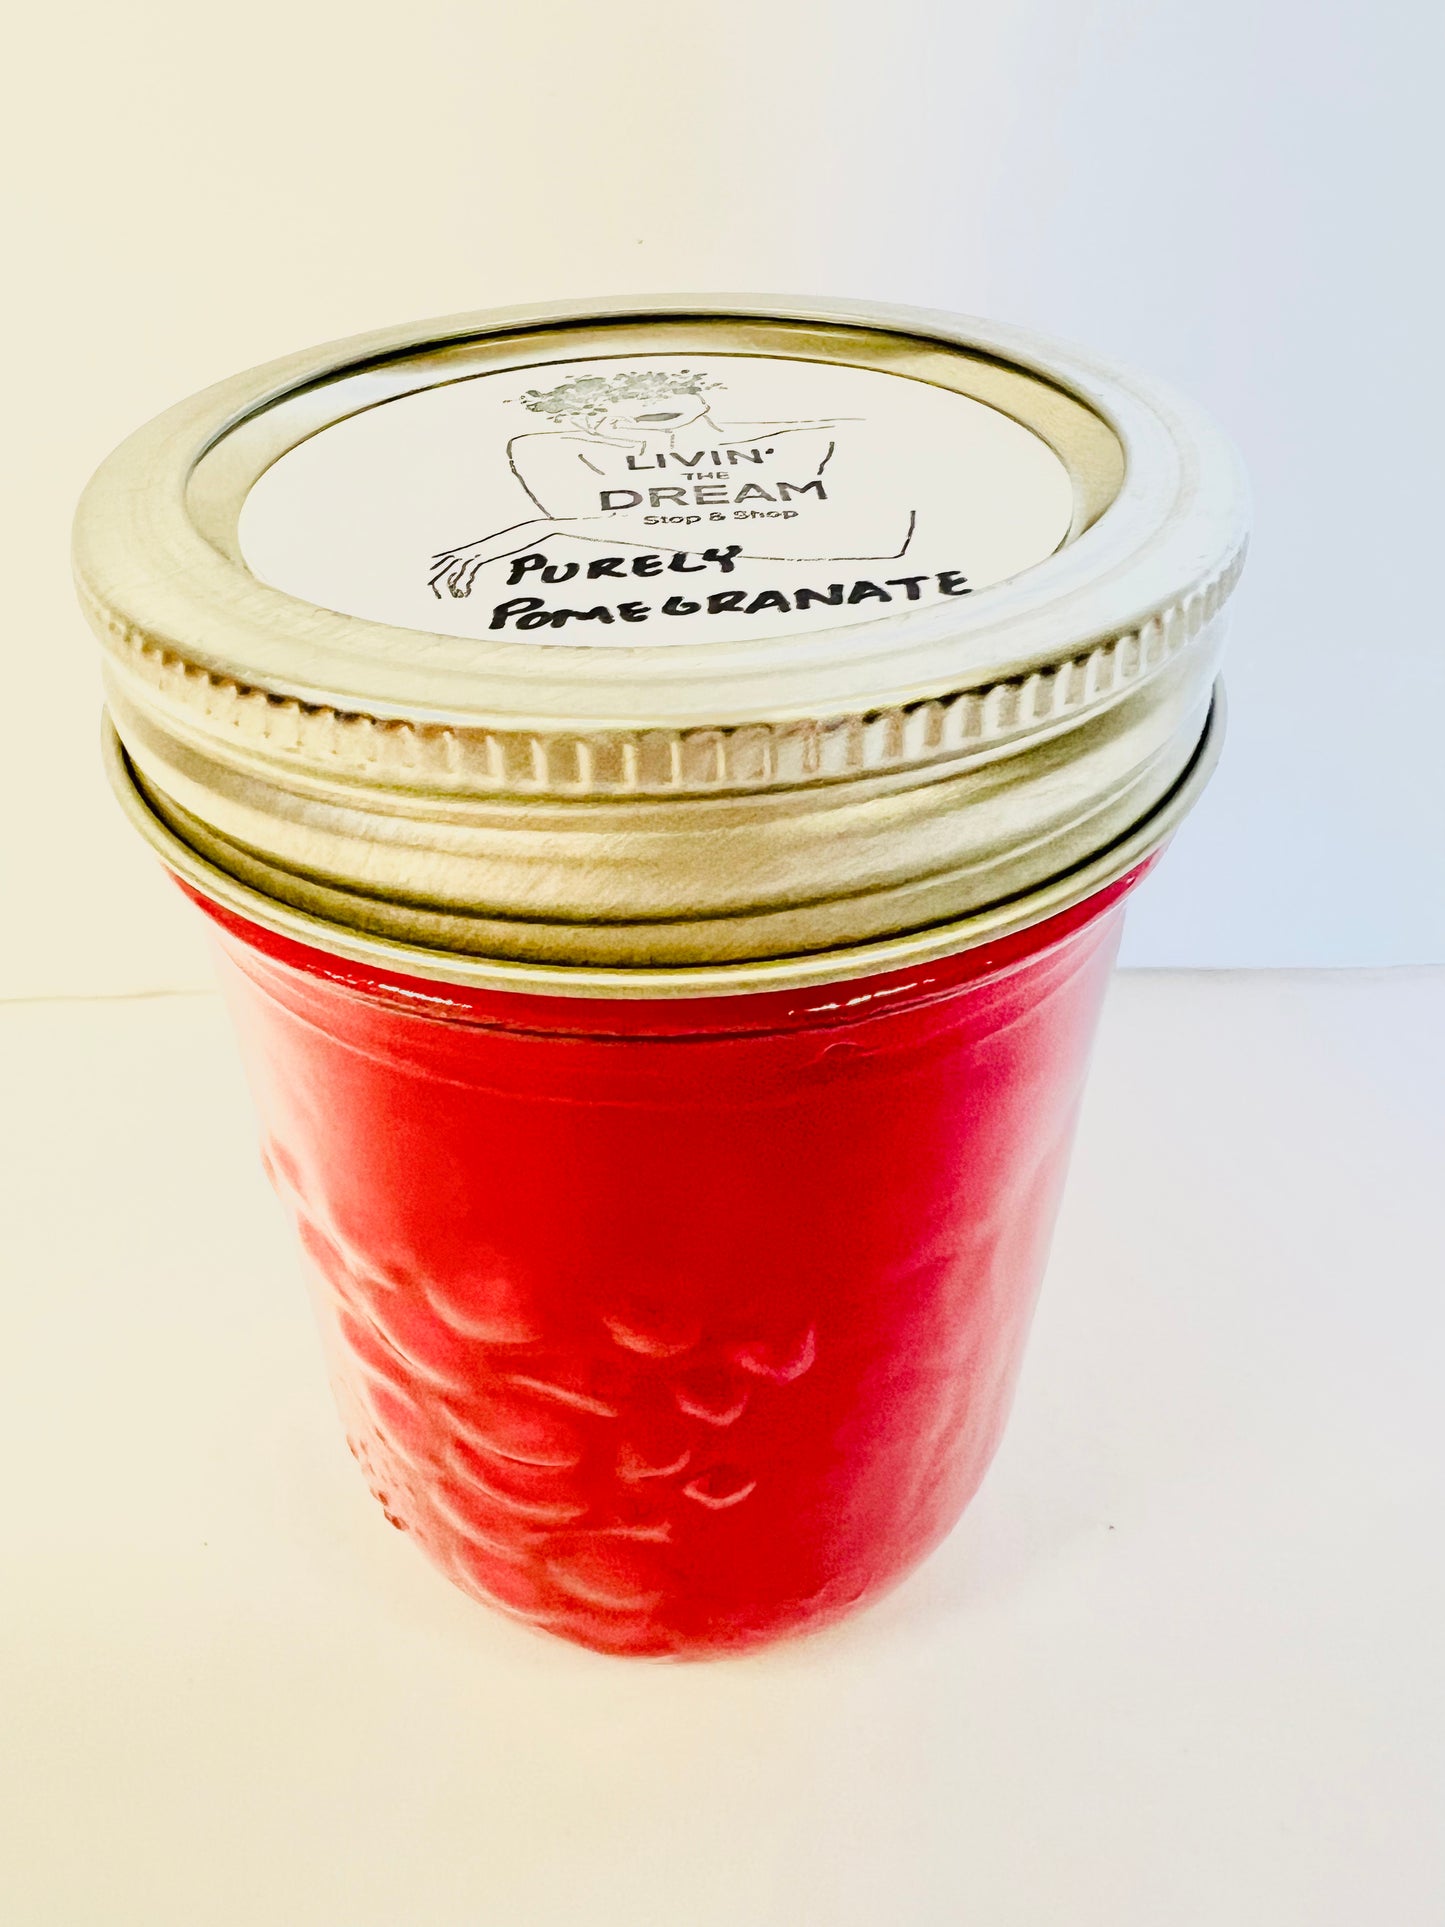 Purely Pomegranate candle